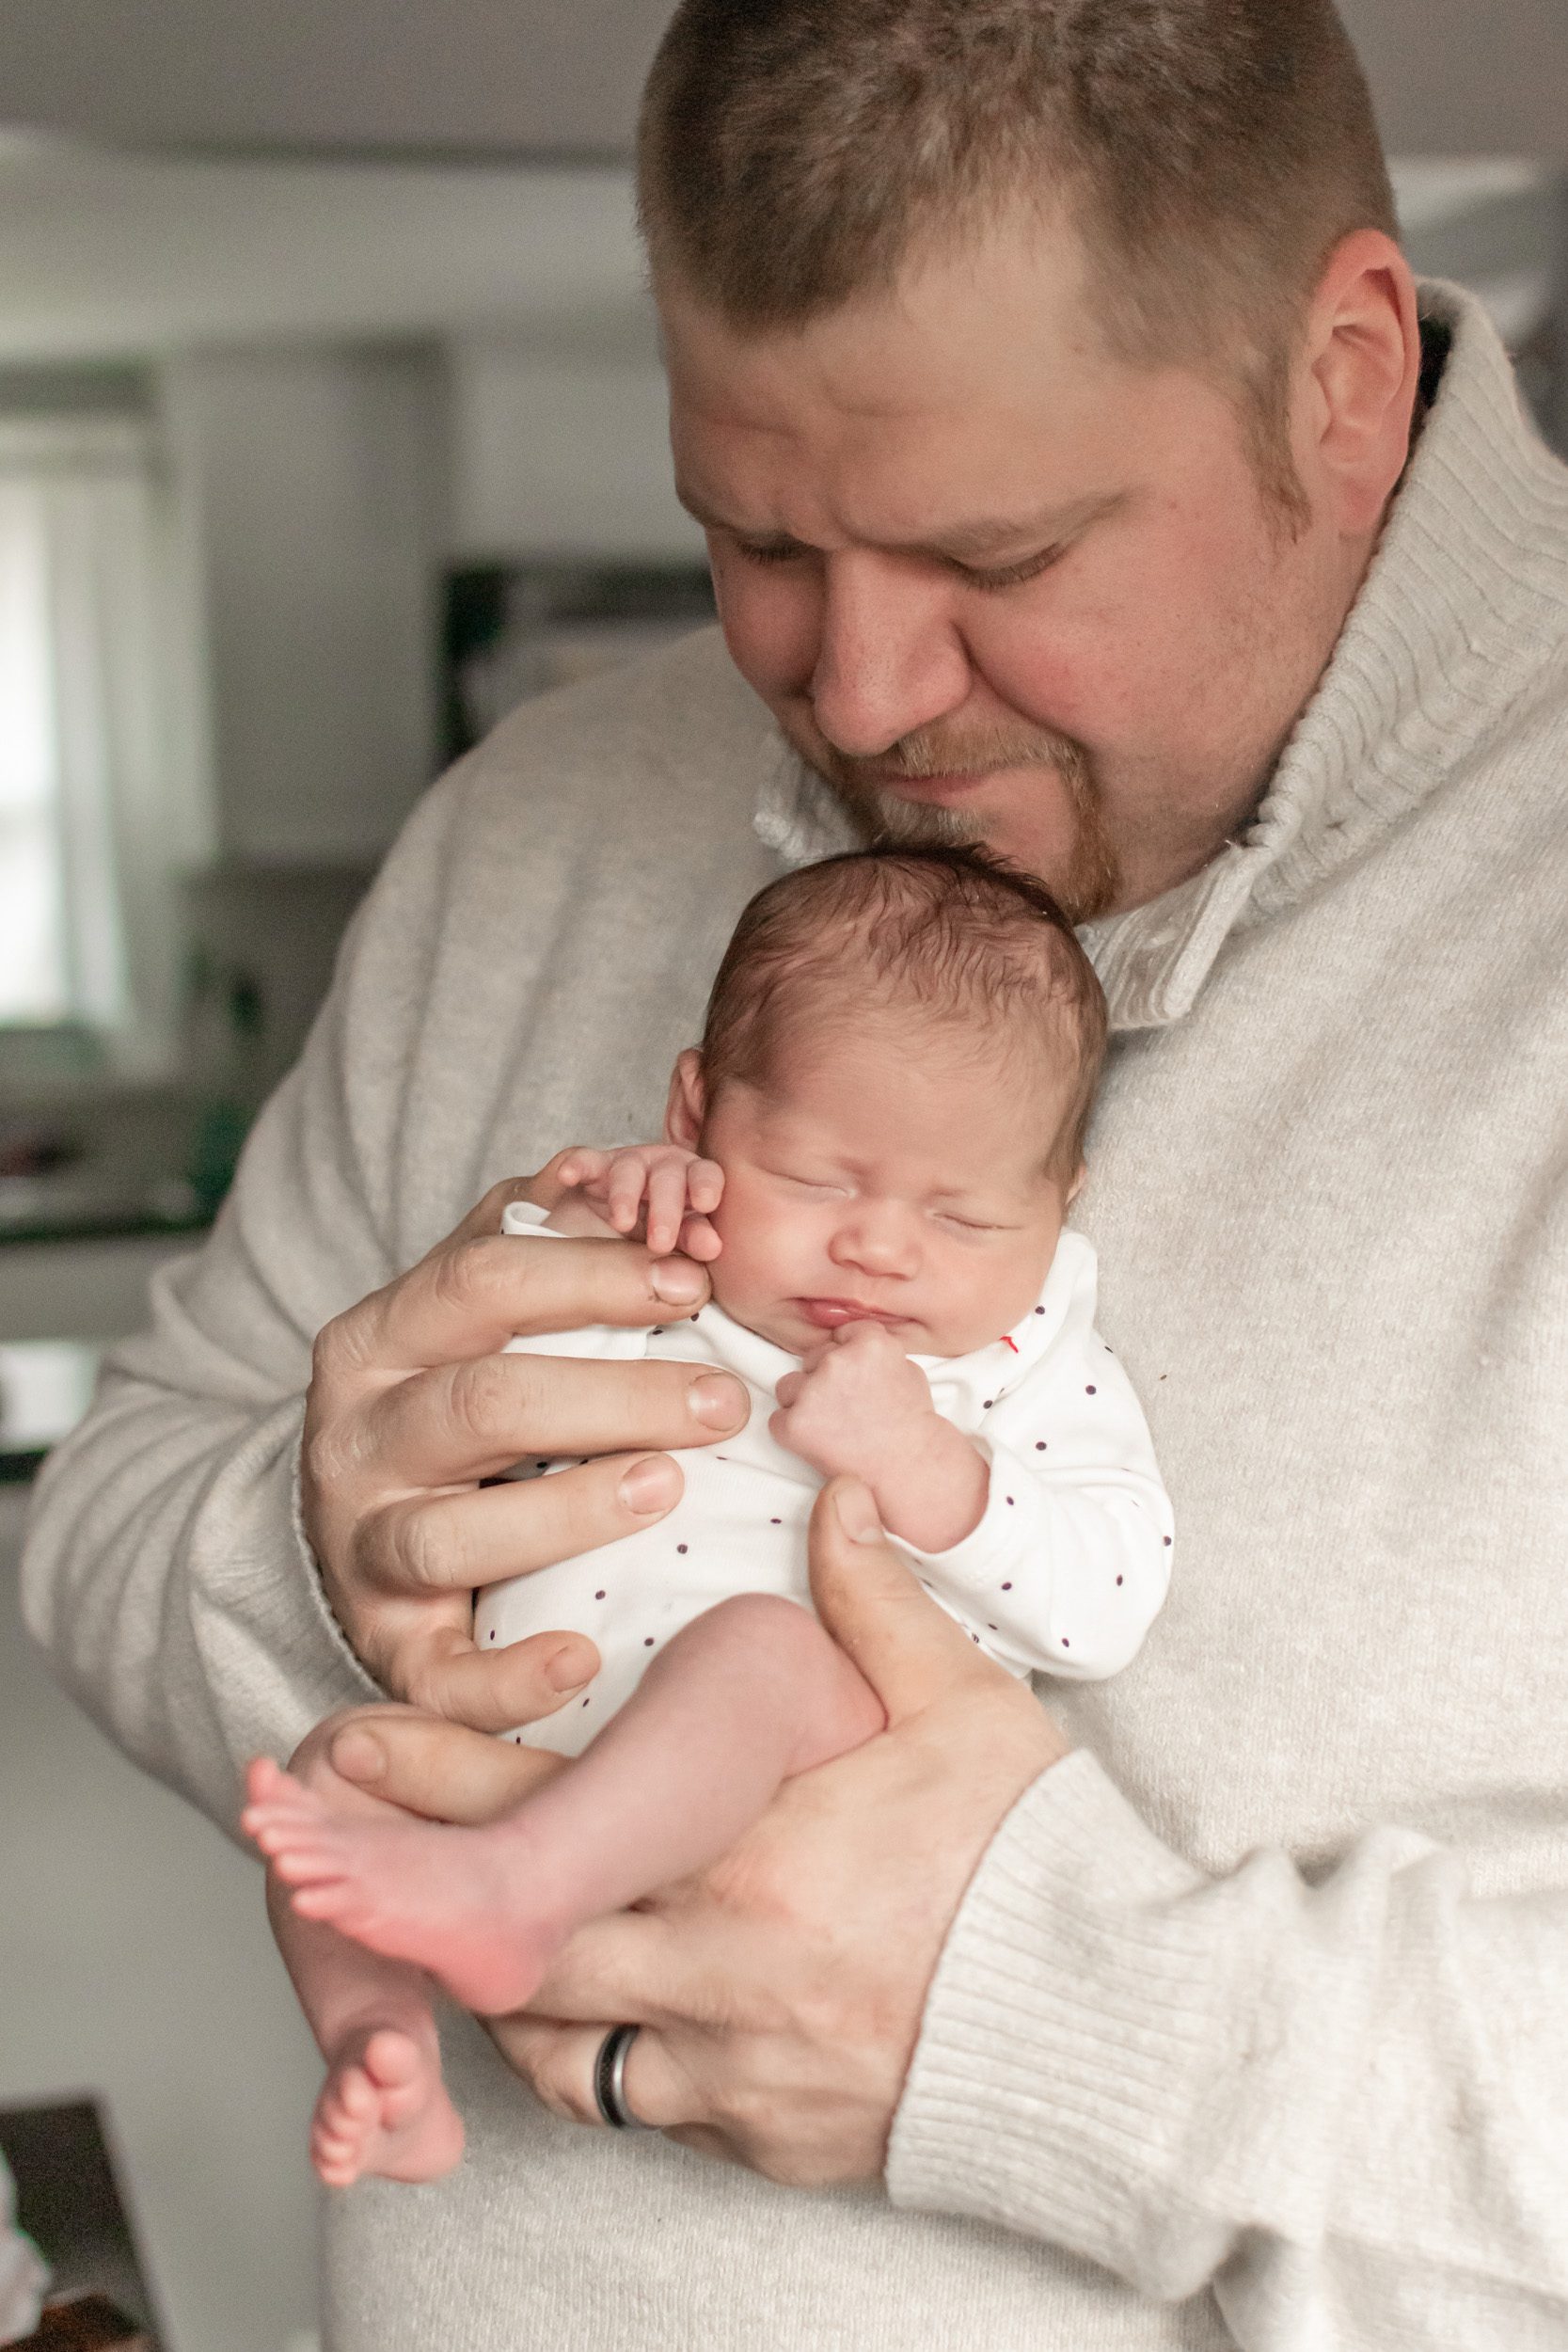 Newborn photo of dad holding his baby girl and looking down at her during an in home newborn photo session